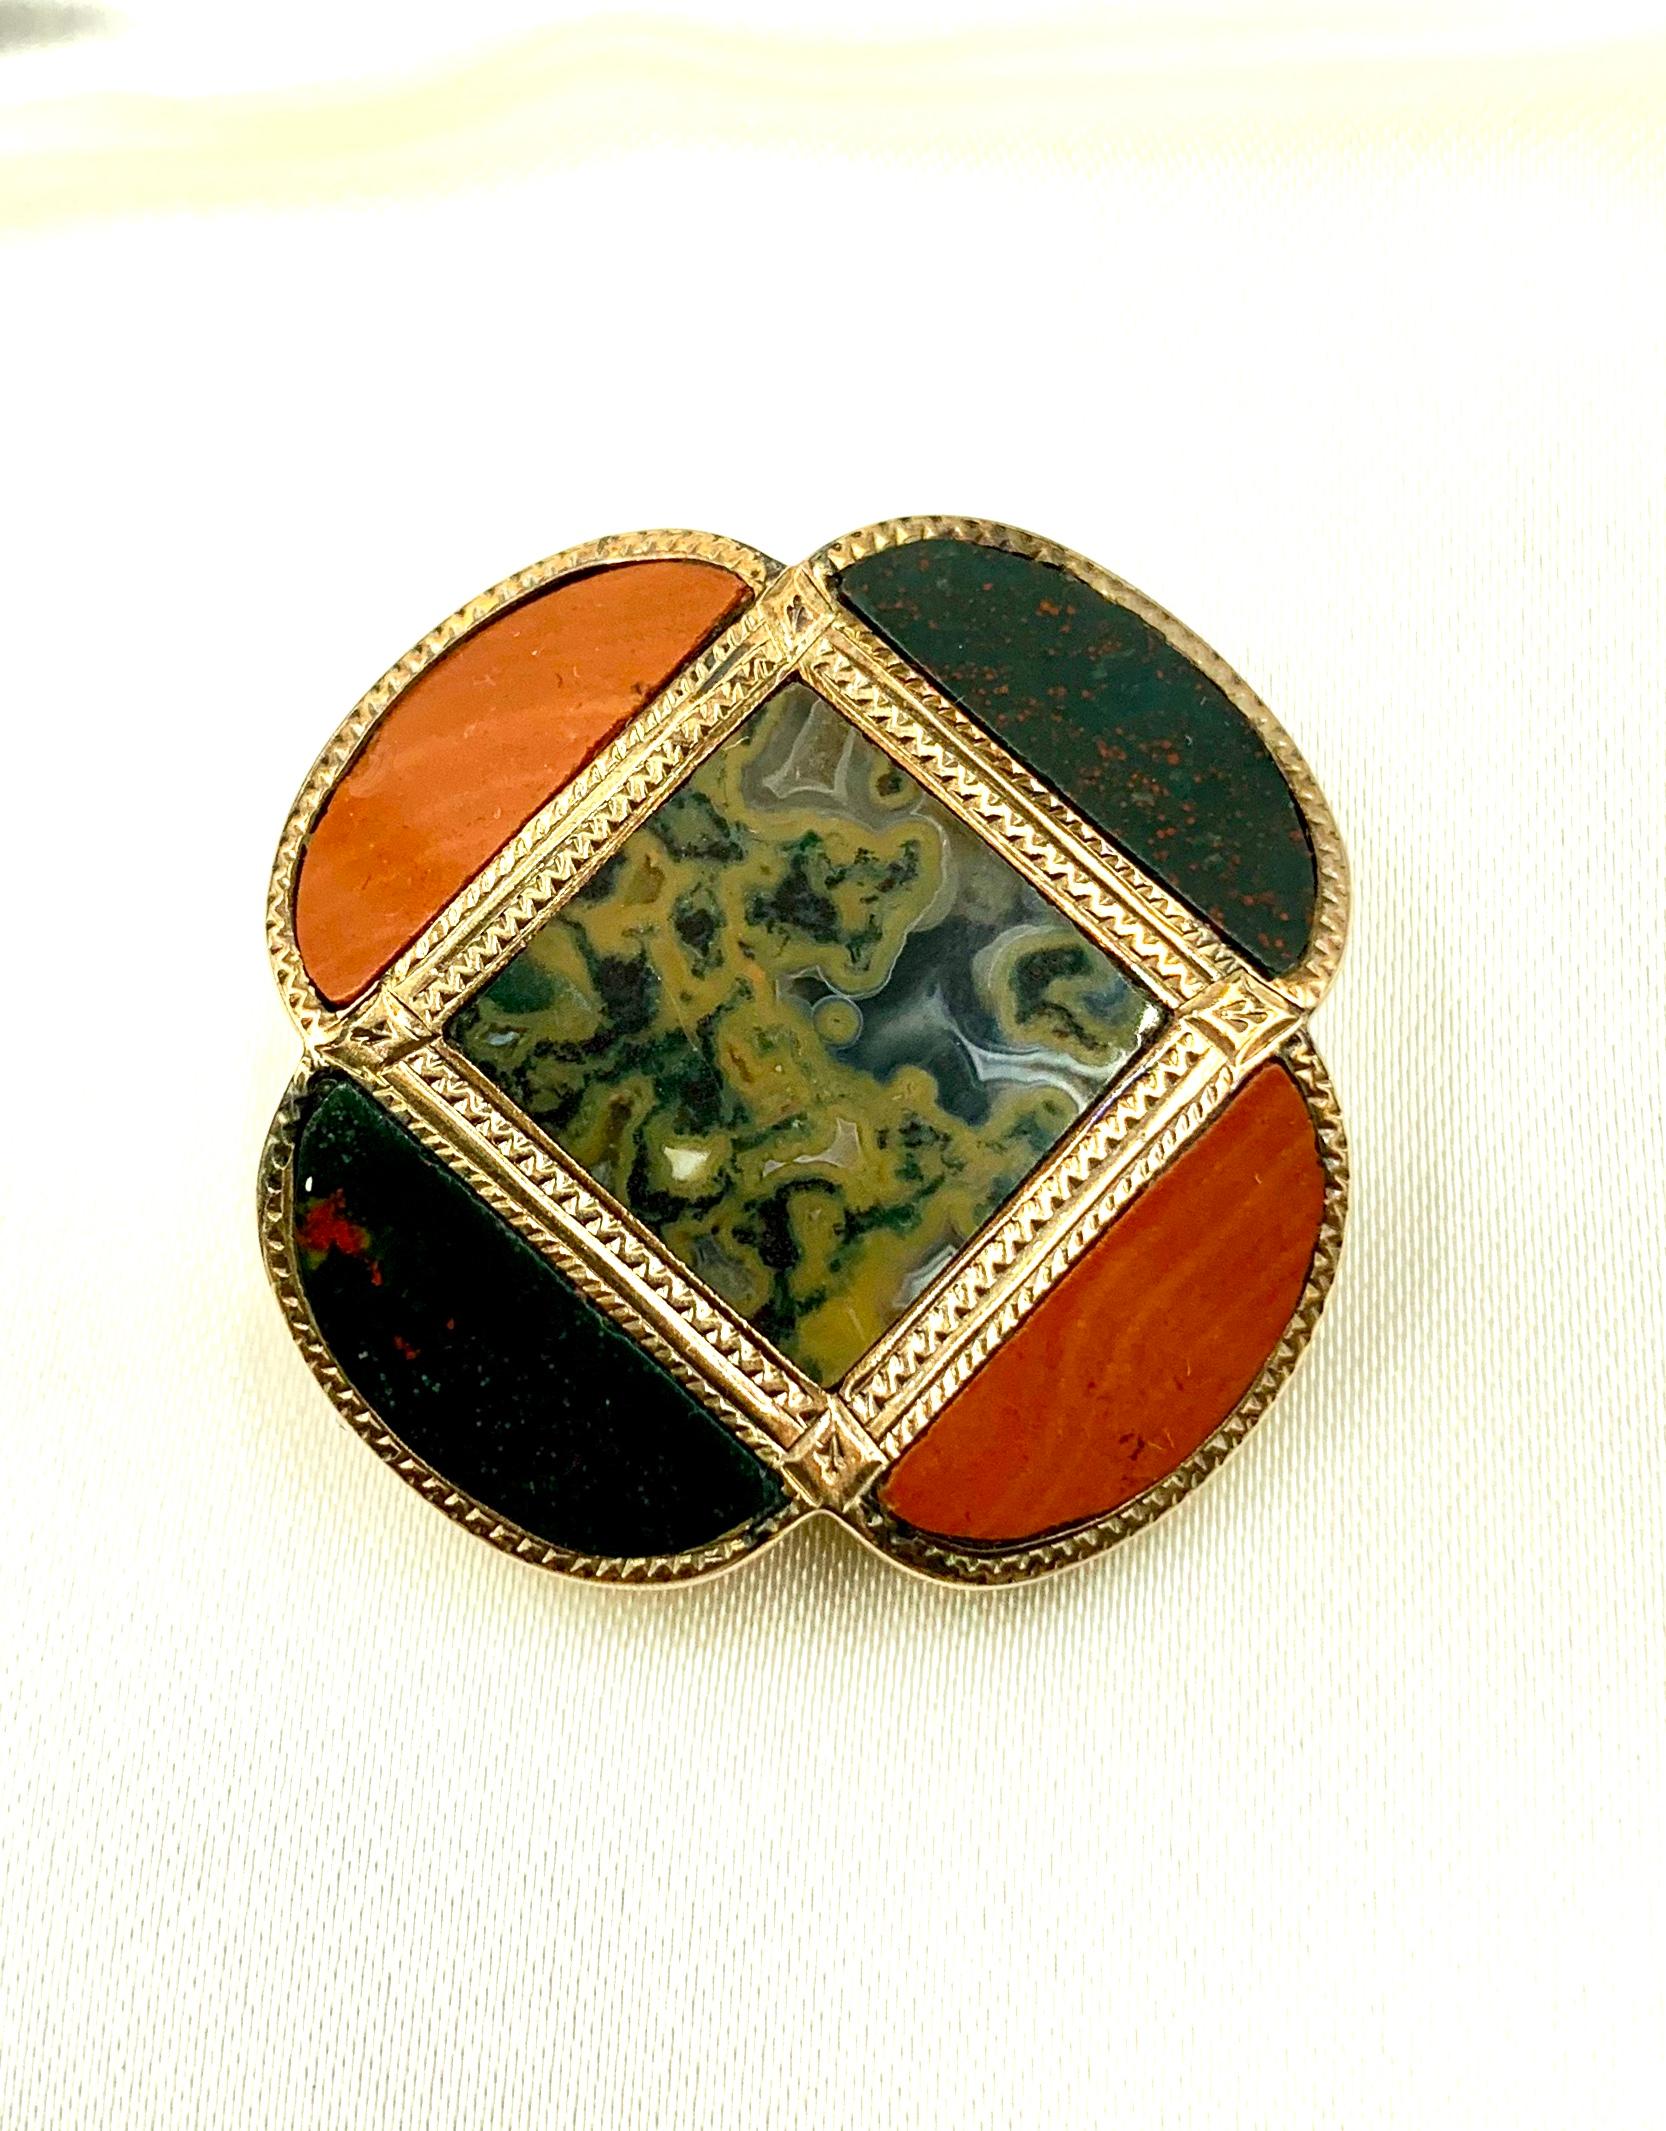 Rare and highly sought after antique Scottish lucky four leaf clover brooch. Composed of a square central figured agate panel inset in a wave motif gold frame, surrounded by four petal elements of alternating bloodstone and jasper inset in gold